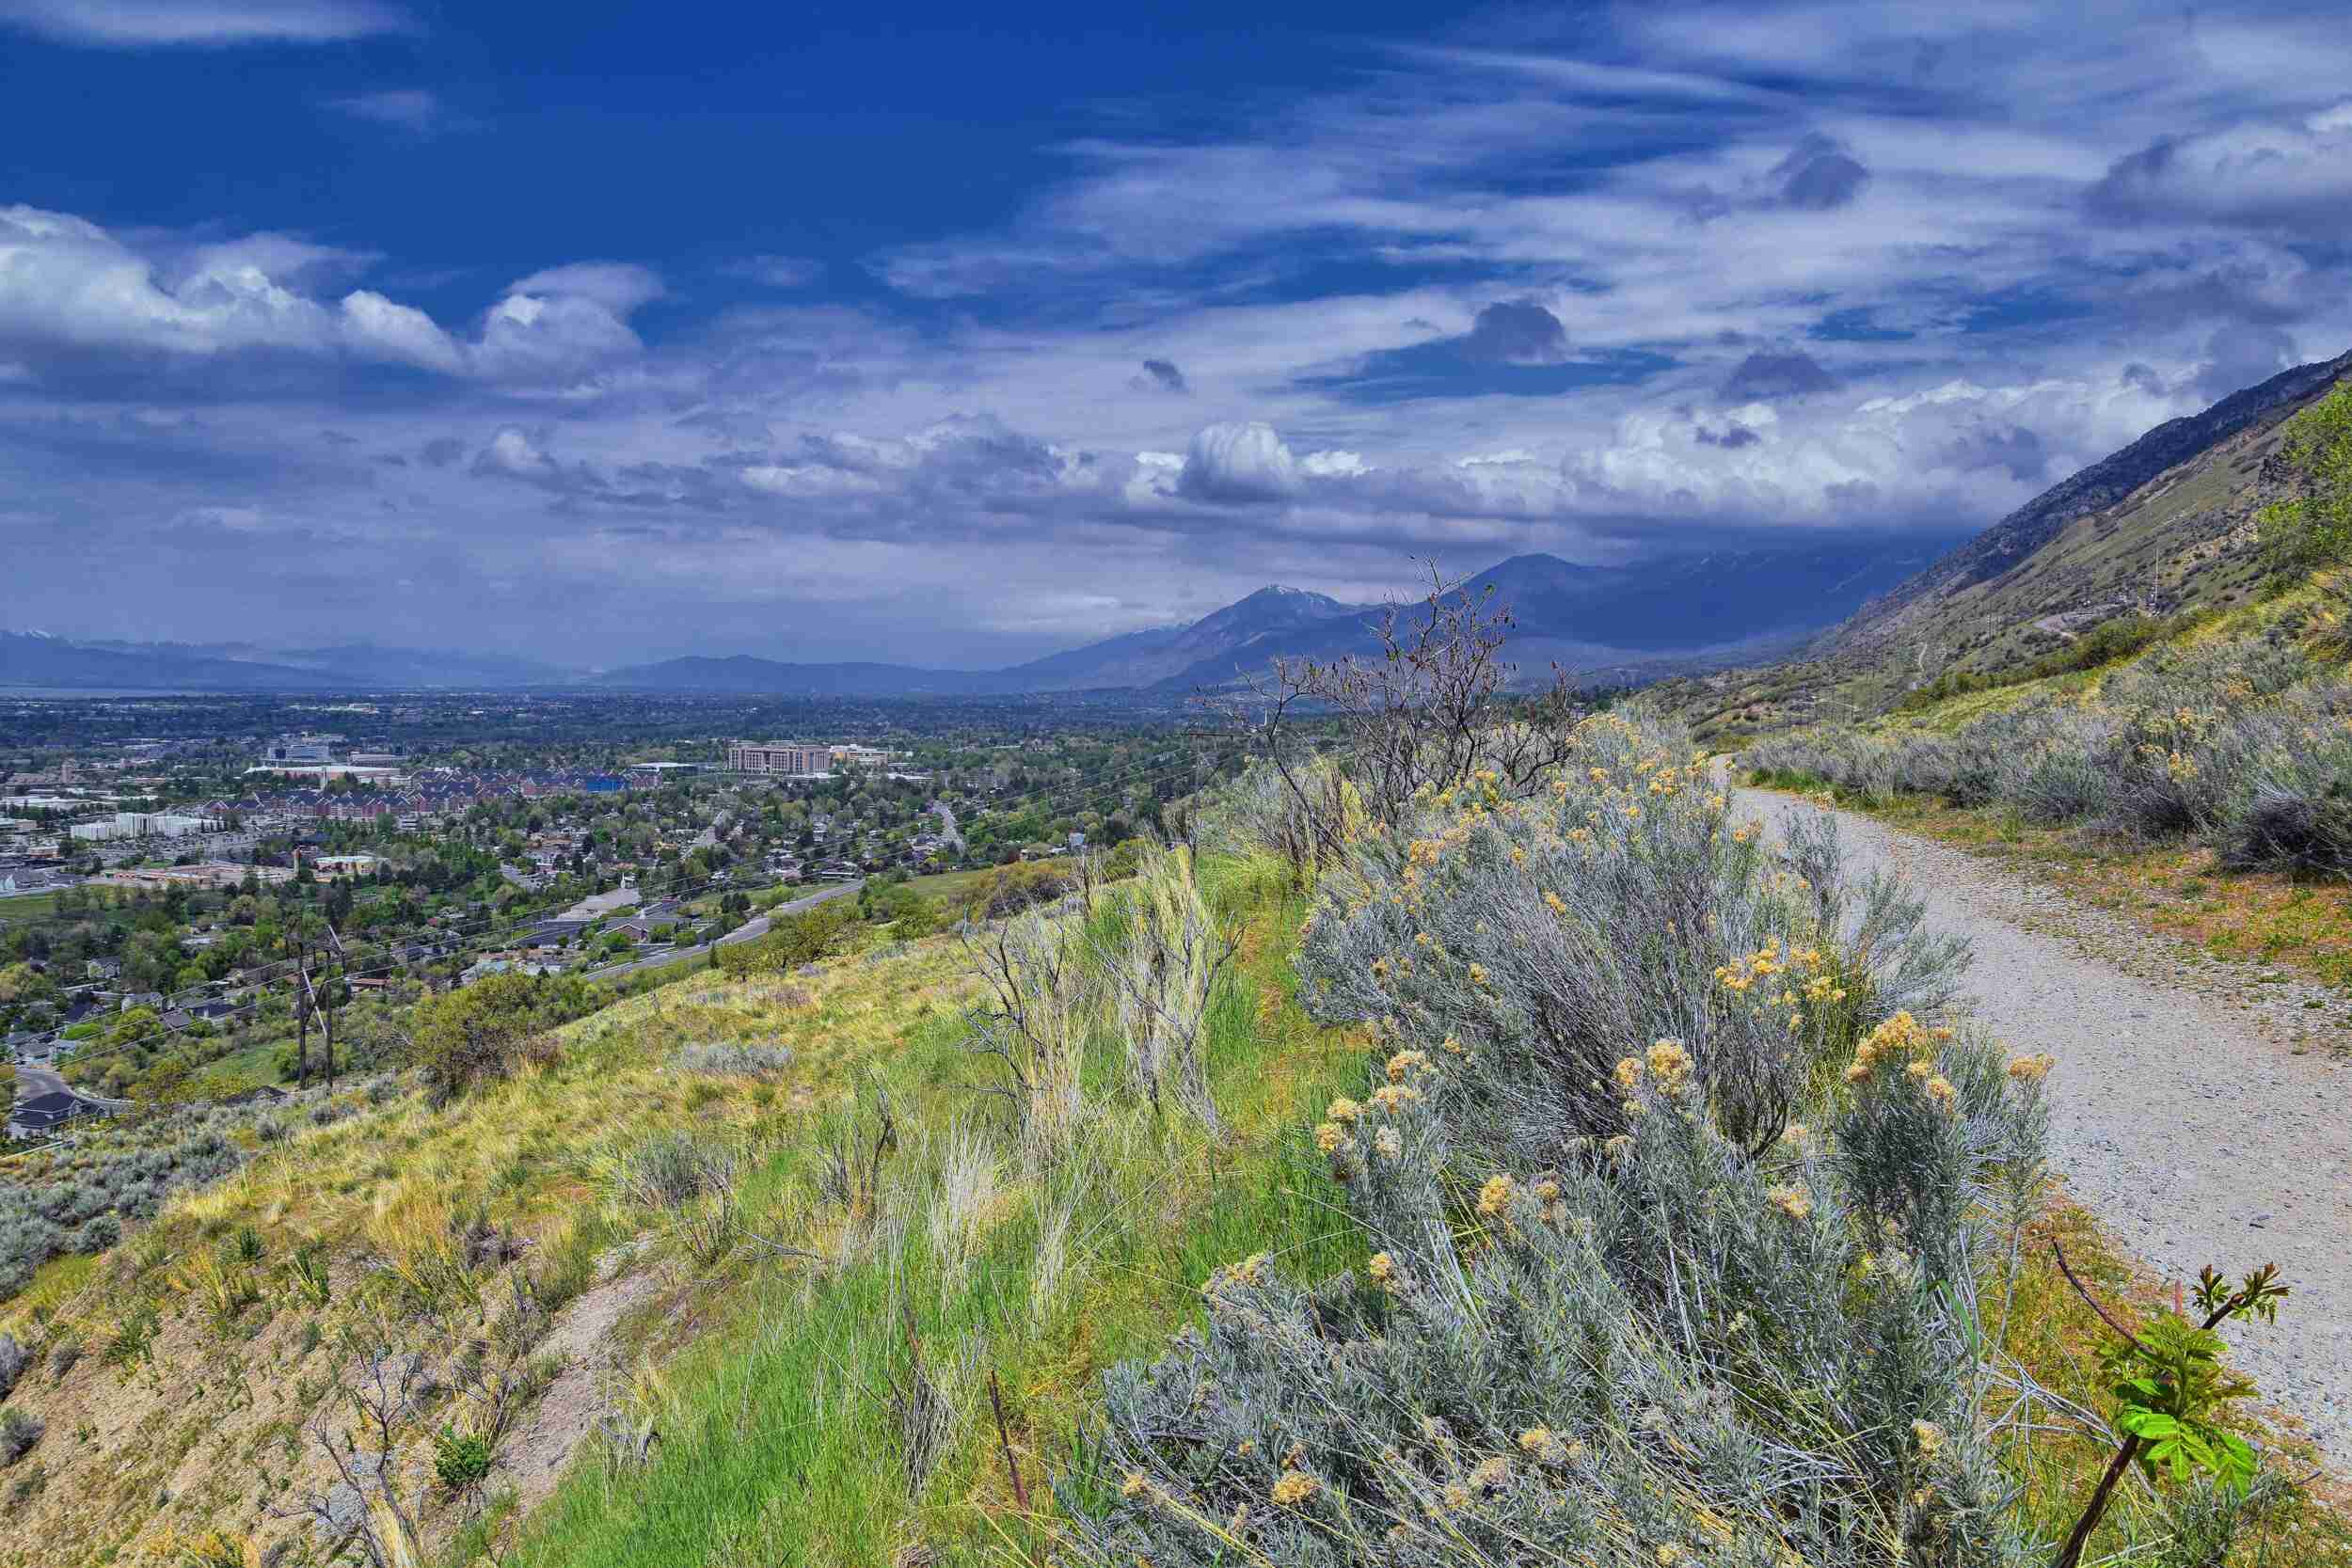 Discover the best Salt Lake City mountain bike trails with this guide written by a local shredder. Explore DH tracks, flow trails, and more.